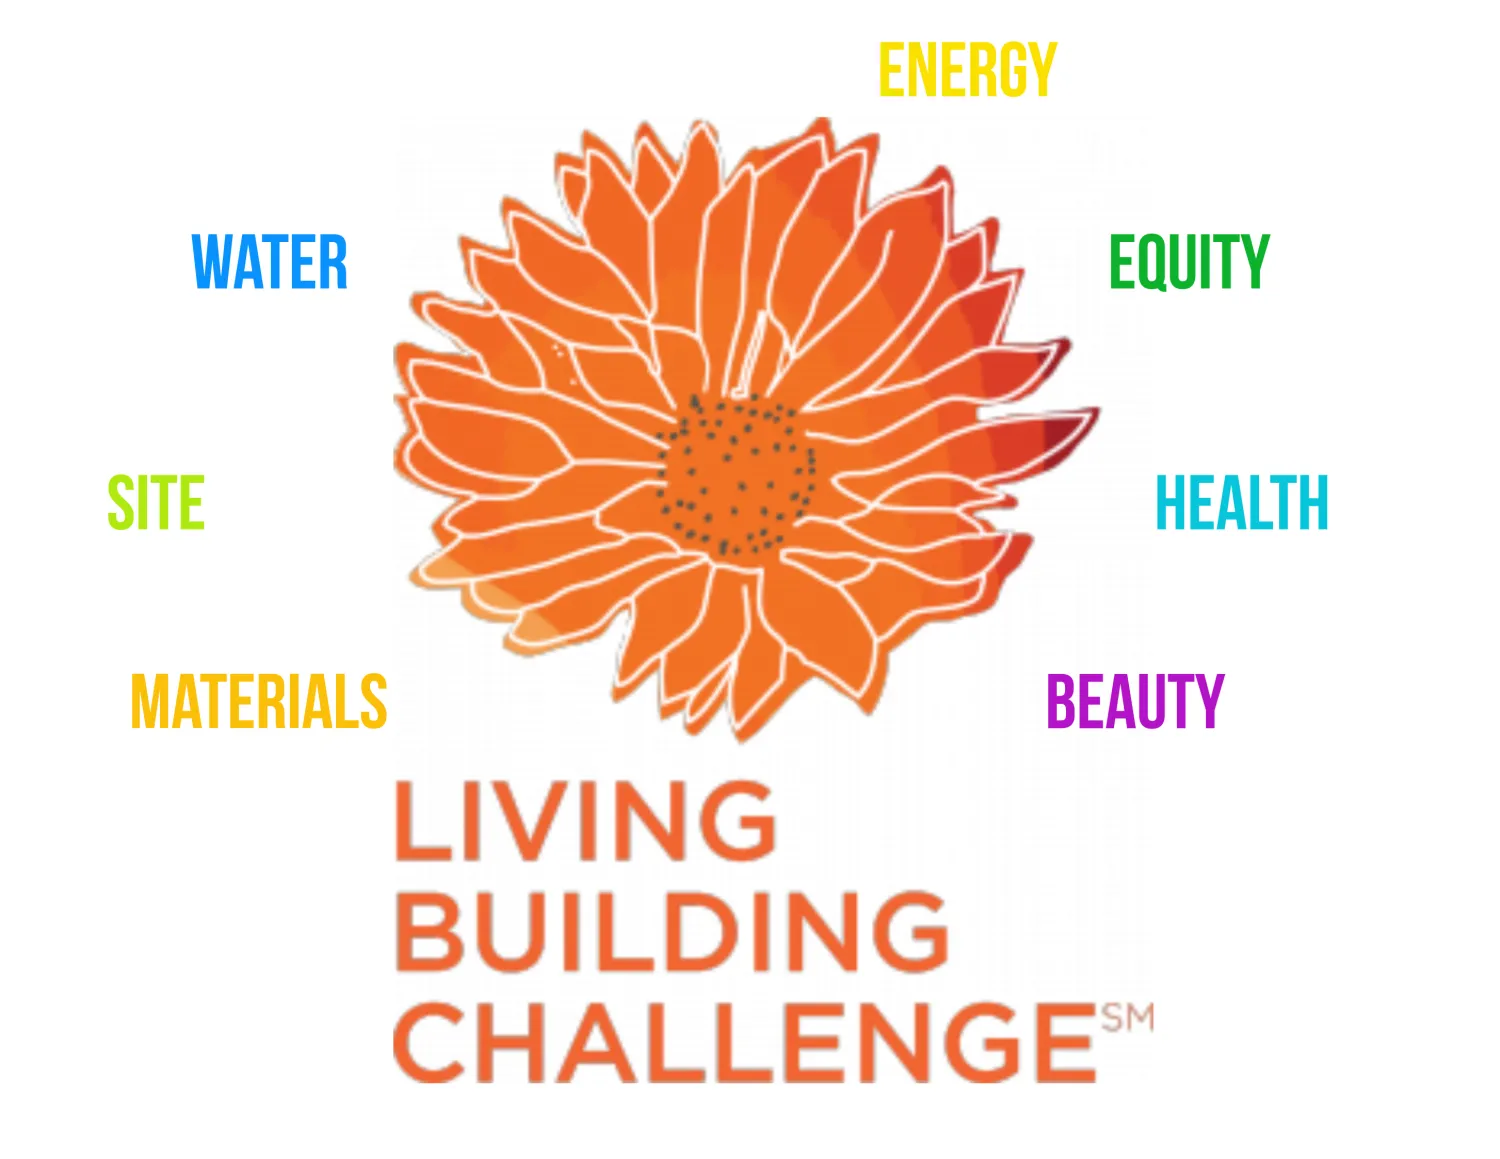 Living Building Challenge Flower with text: Materials, Site, Water, Energy, Equity, Health, Beauty around an orange flower.